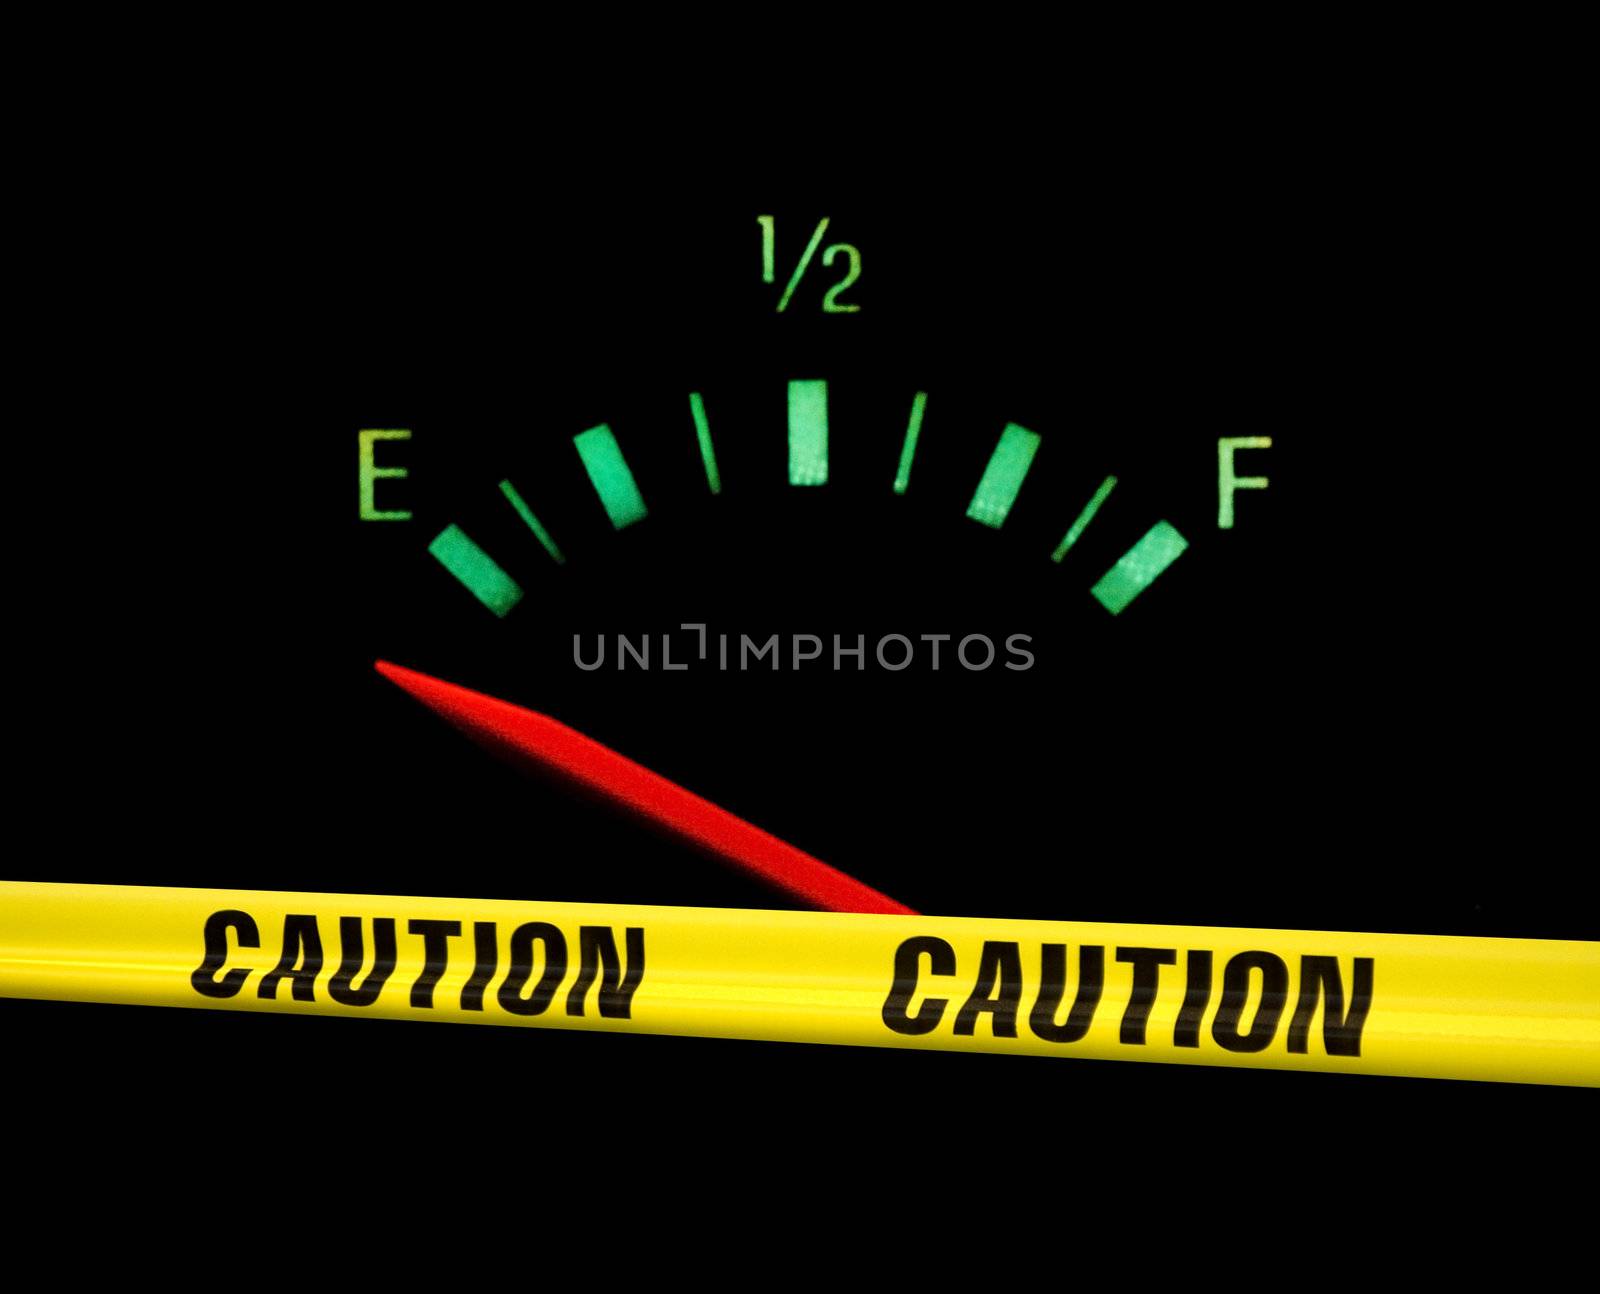 Gas gauge bright colors on empty on a black background with yellow caution tape across the front of it